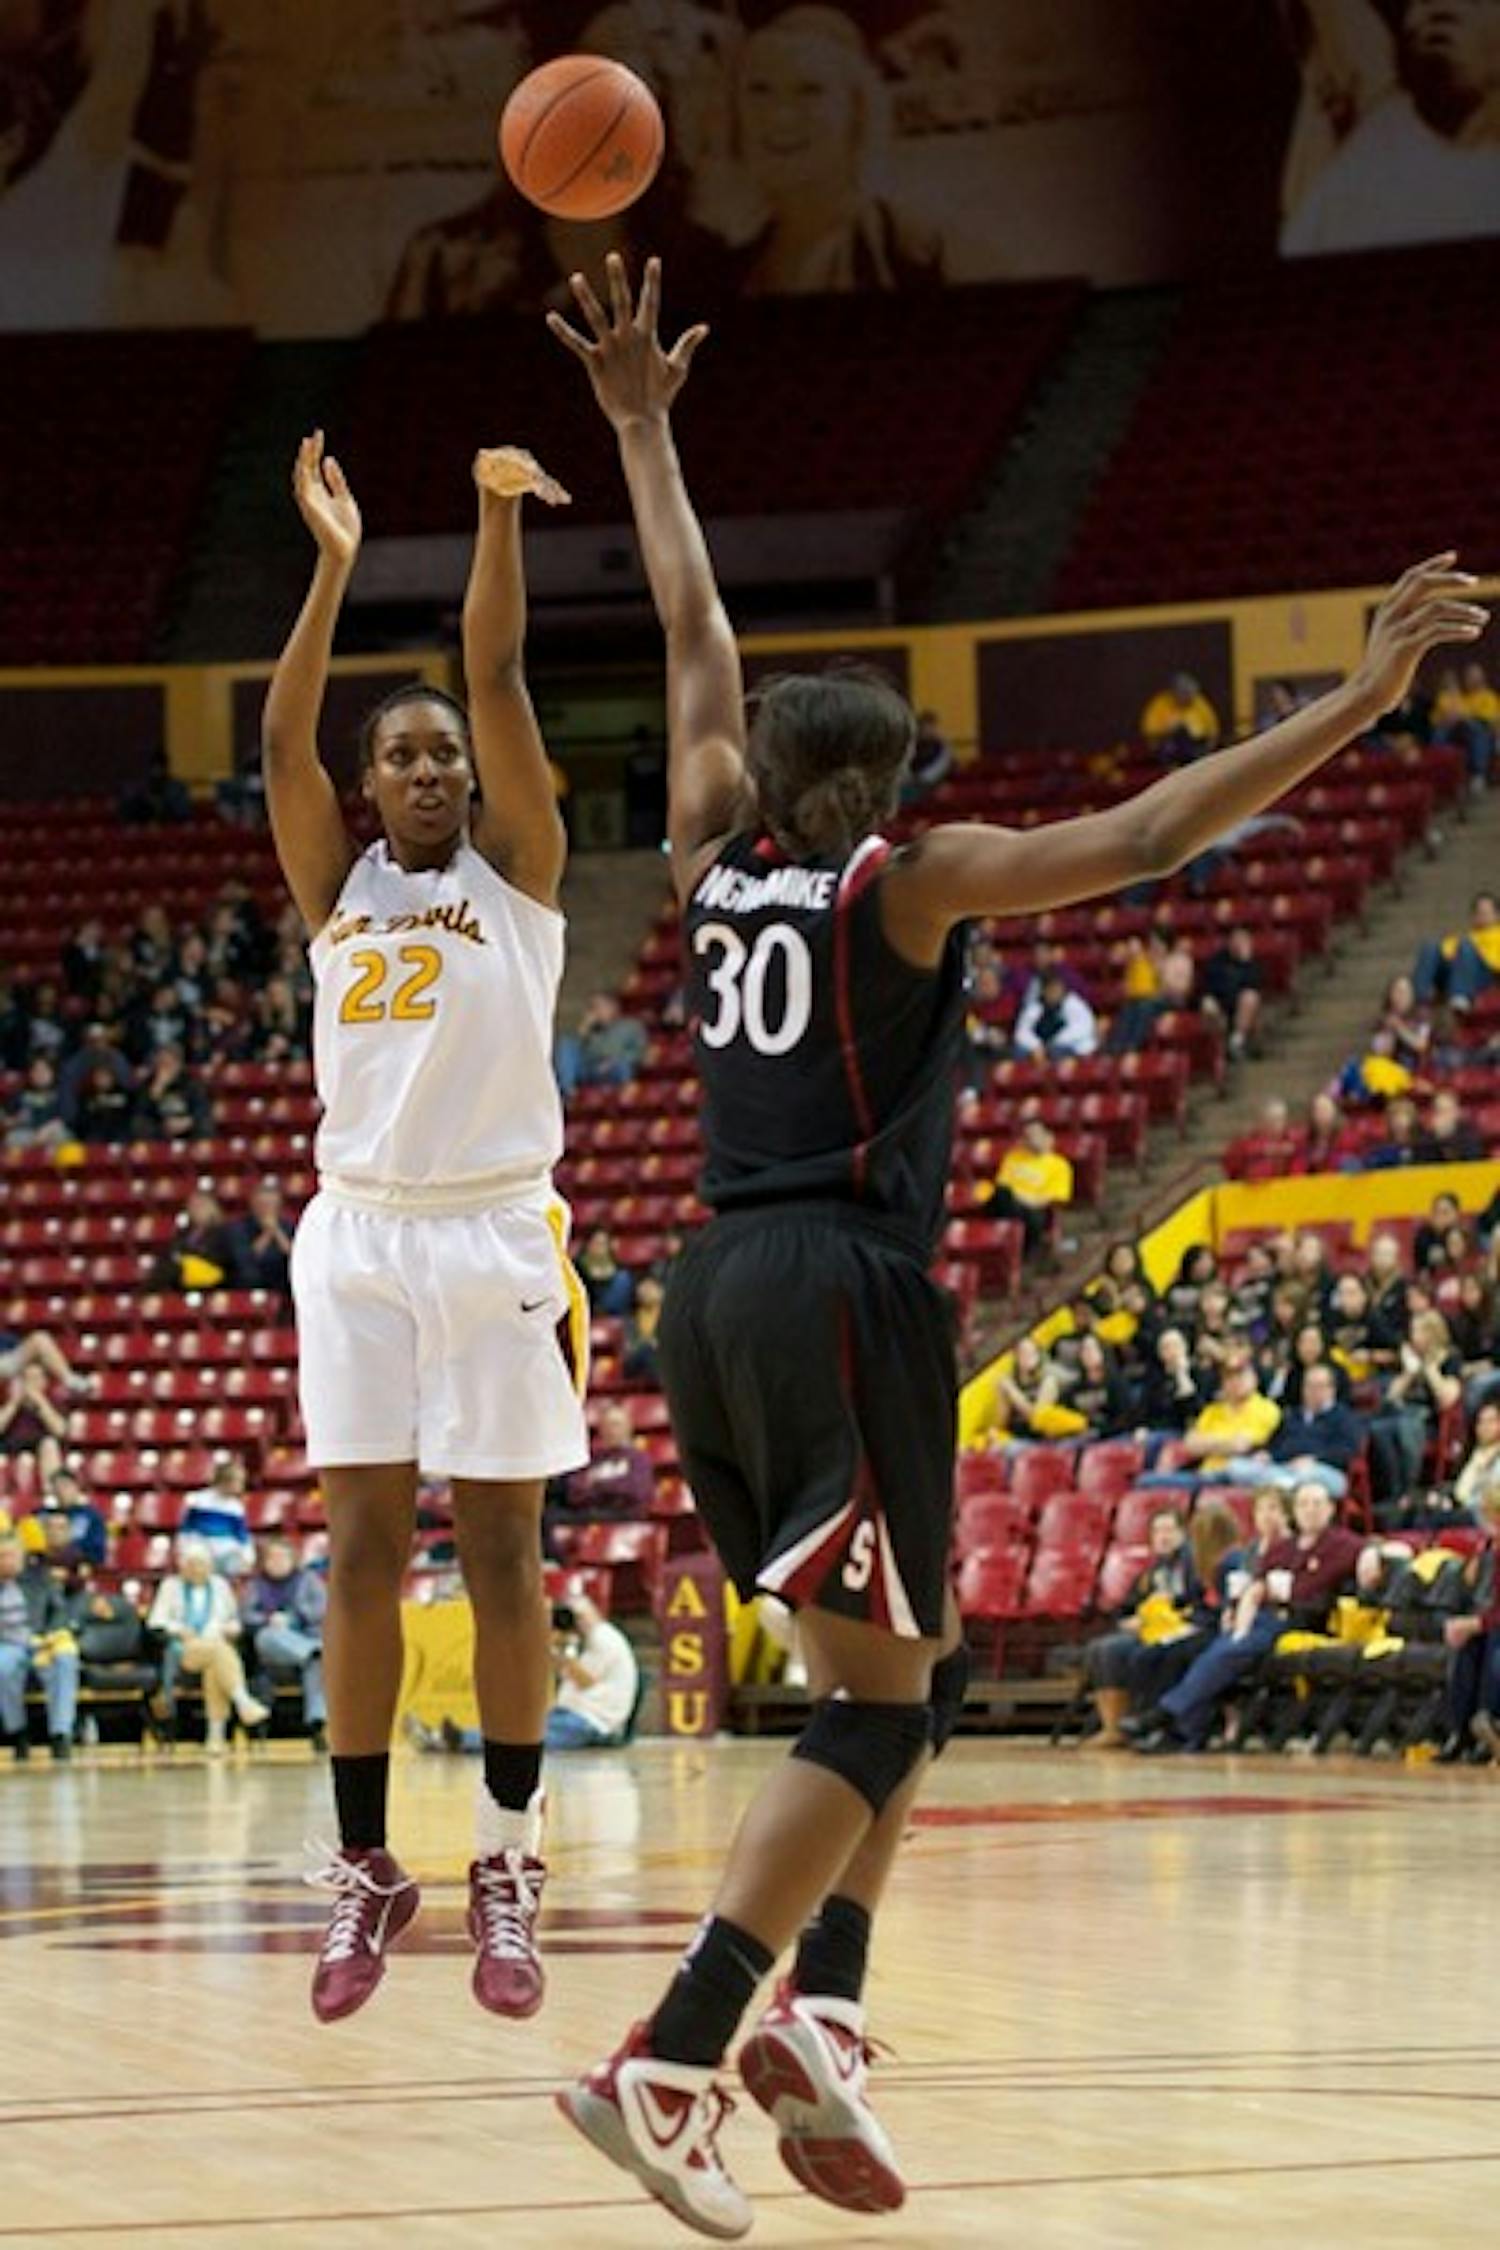 Crucial weekend: ASU redshirt sophomore forward Janae Fulcher takes a shot from the foul line with Stanford junior forward Nnemkadi Ogwumike defending on Feb. 3. The Sun Devils head up north to Washington this weekend to attempt to solidify a place in the NCAA tournament. (Photo by Michael Arellano)